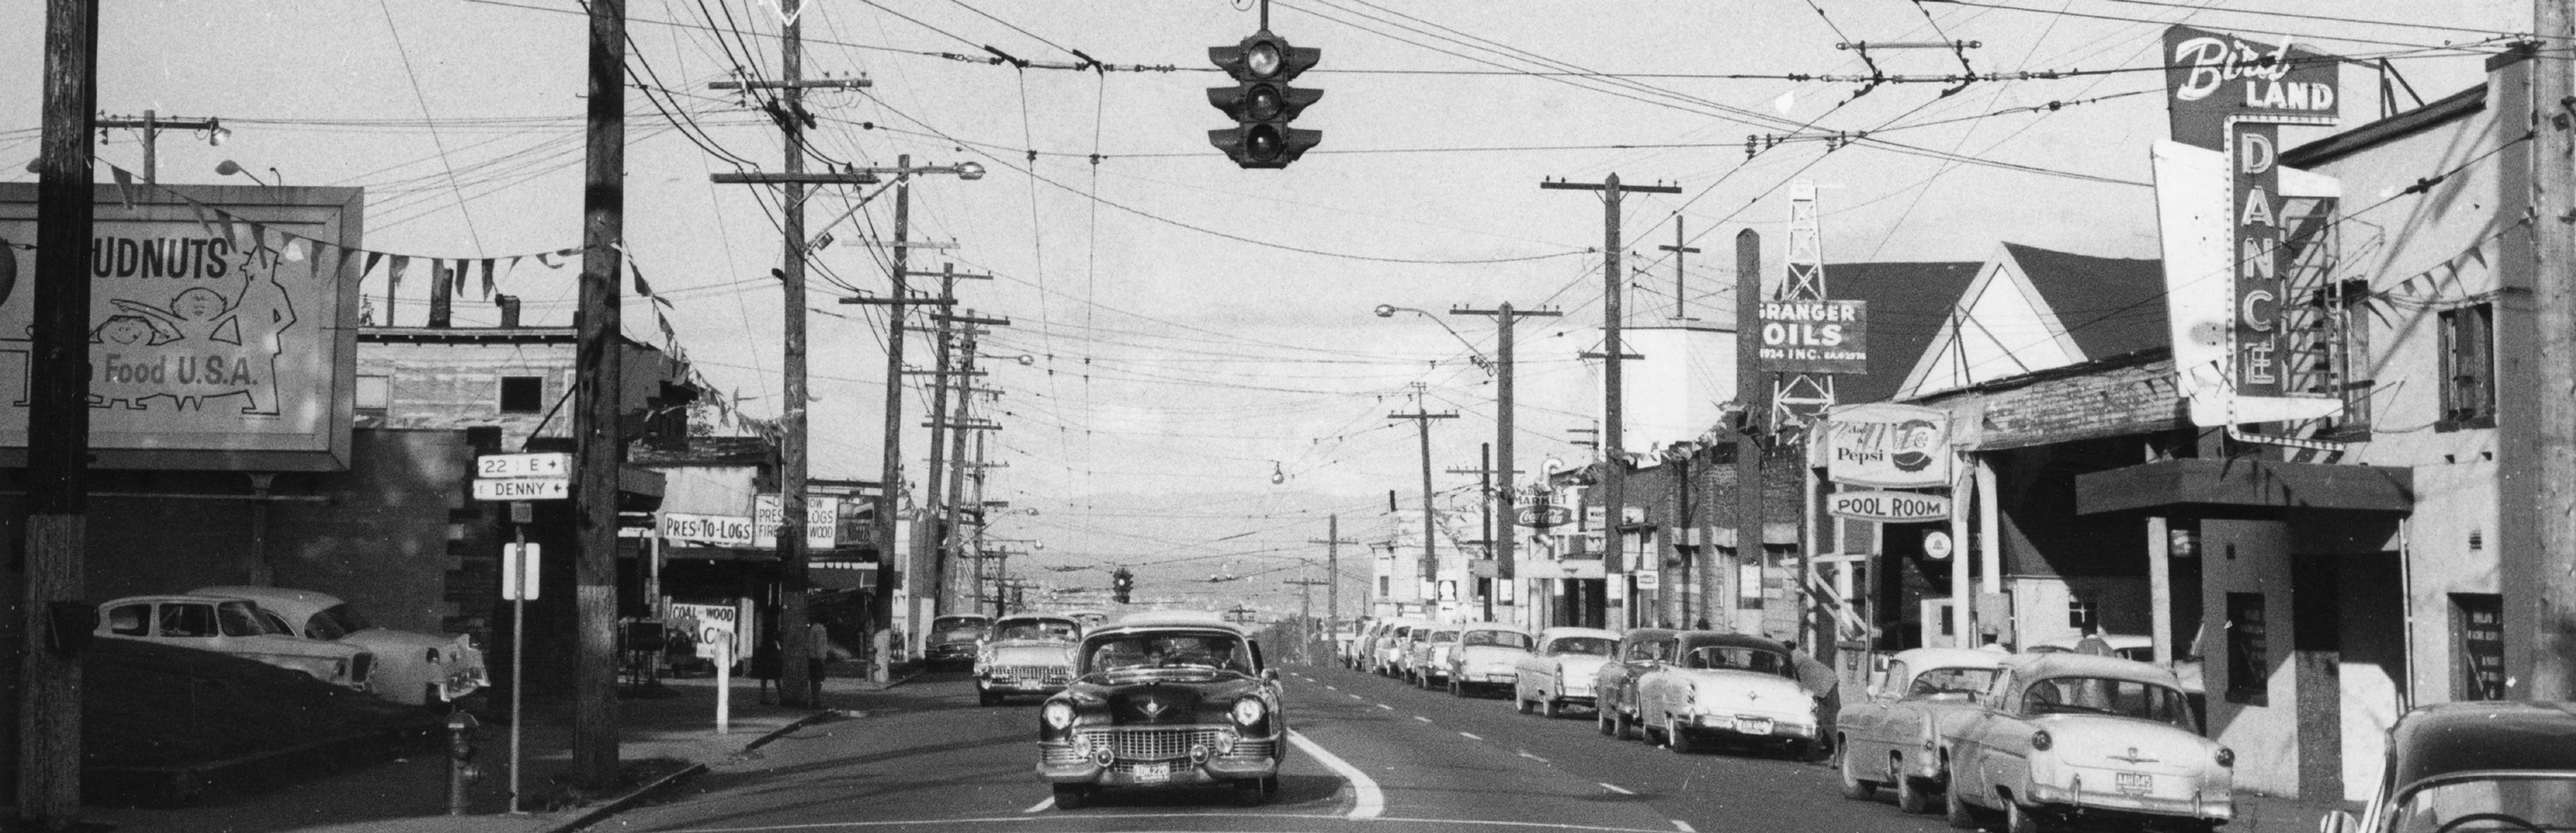 black and white image of a street with cars and power lines overhead 